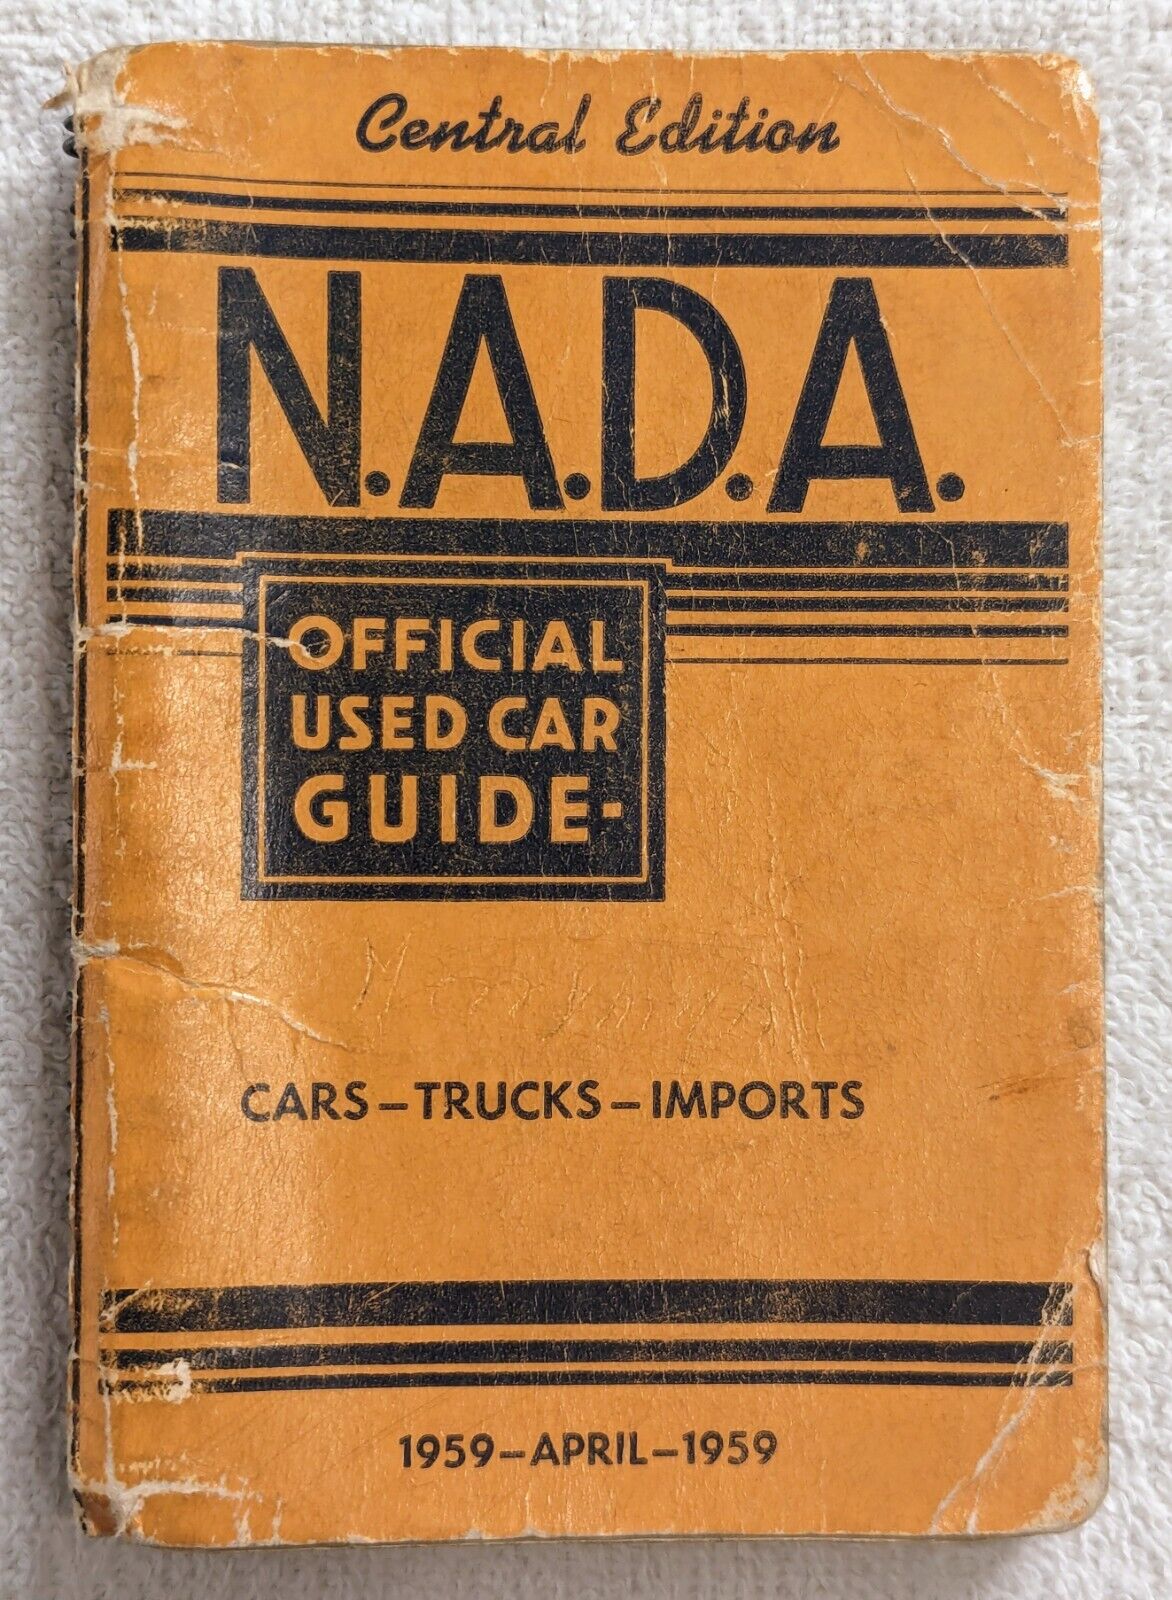 1959 N.A.D.A. OFFICIAL USED CAR GUIDE  - Central Edition - Cars Trucks Imports